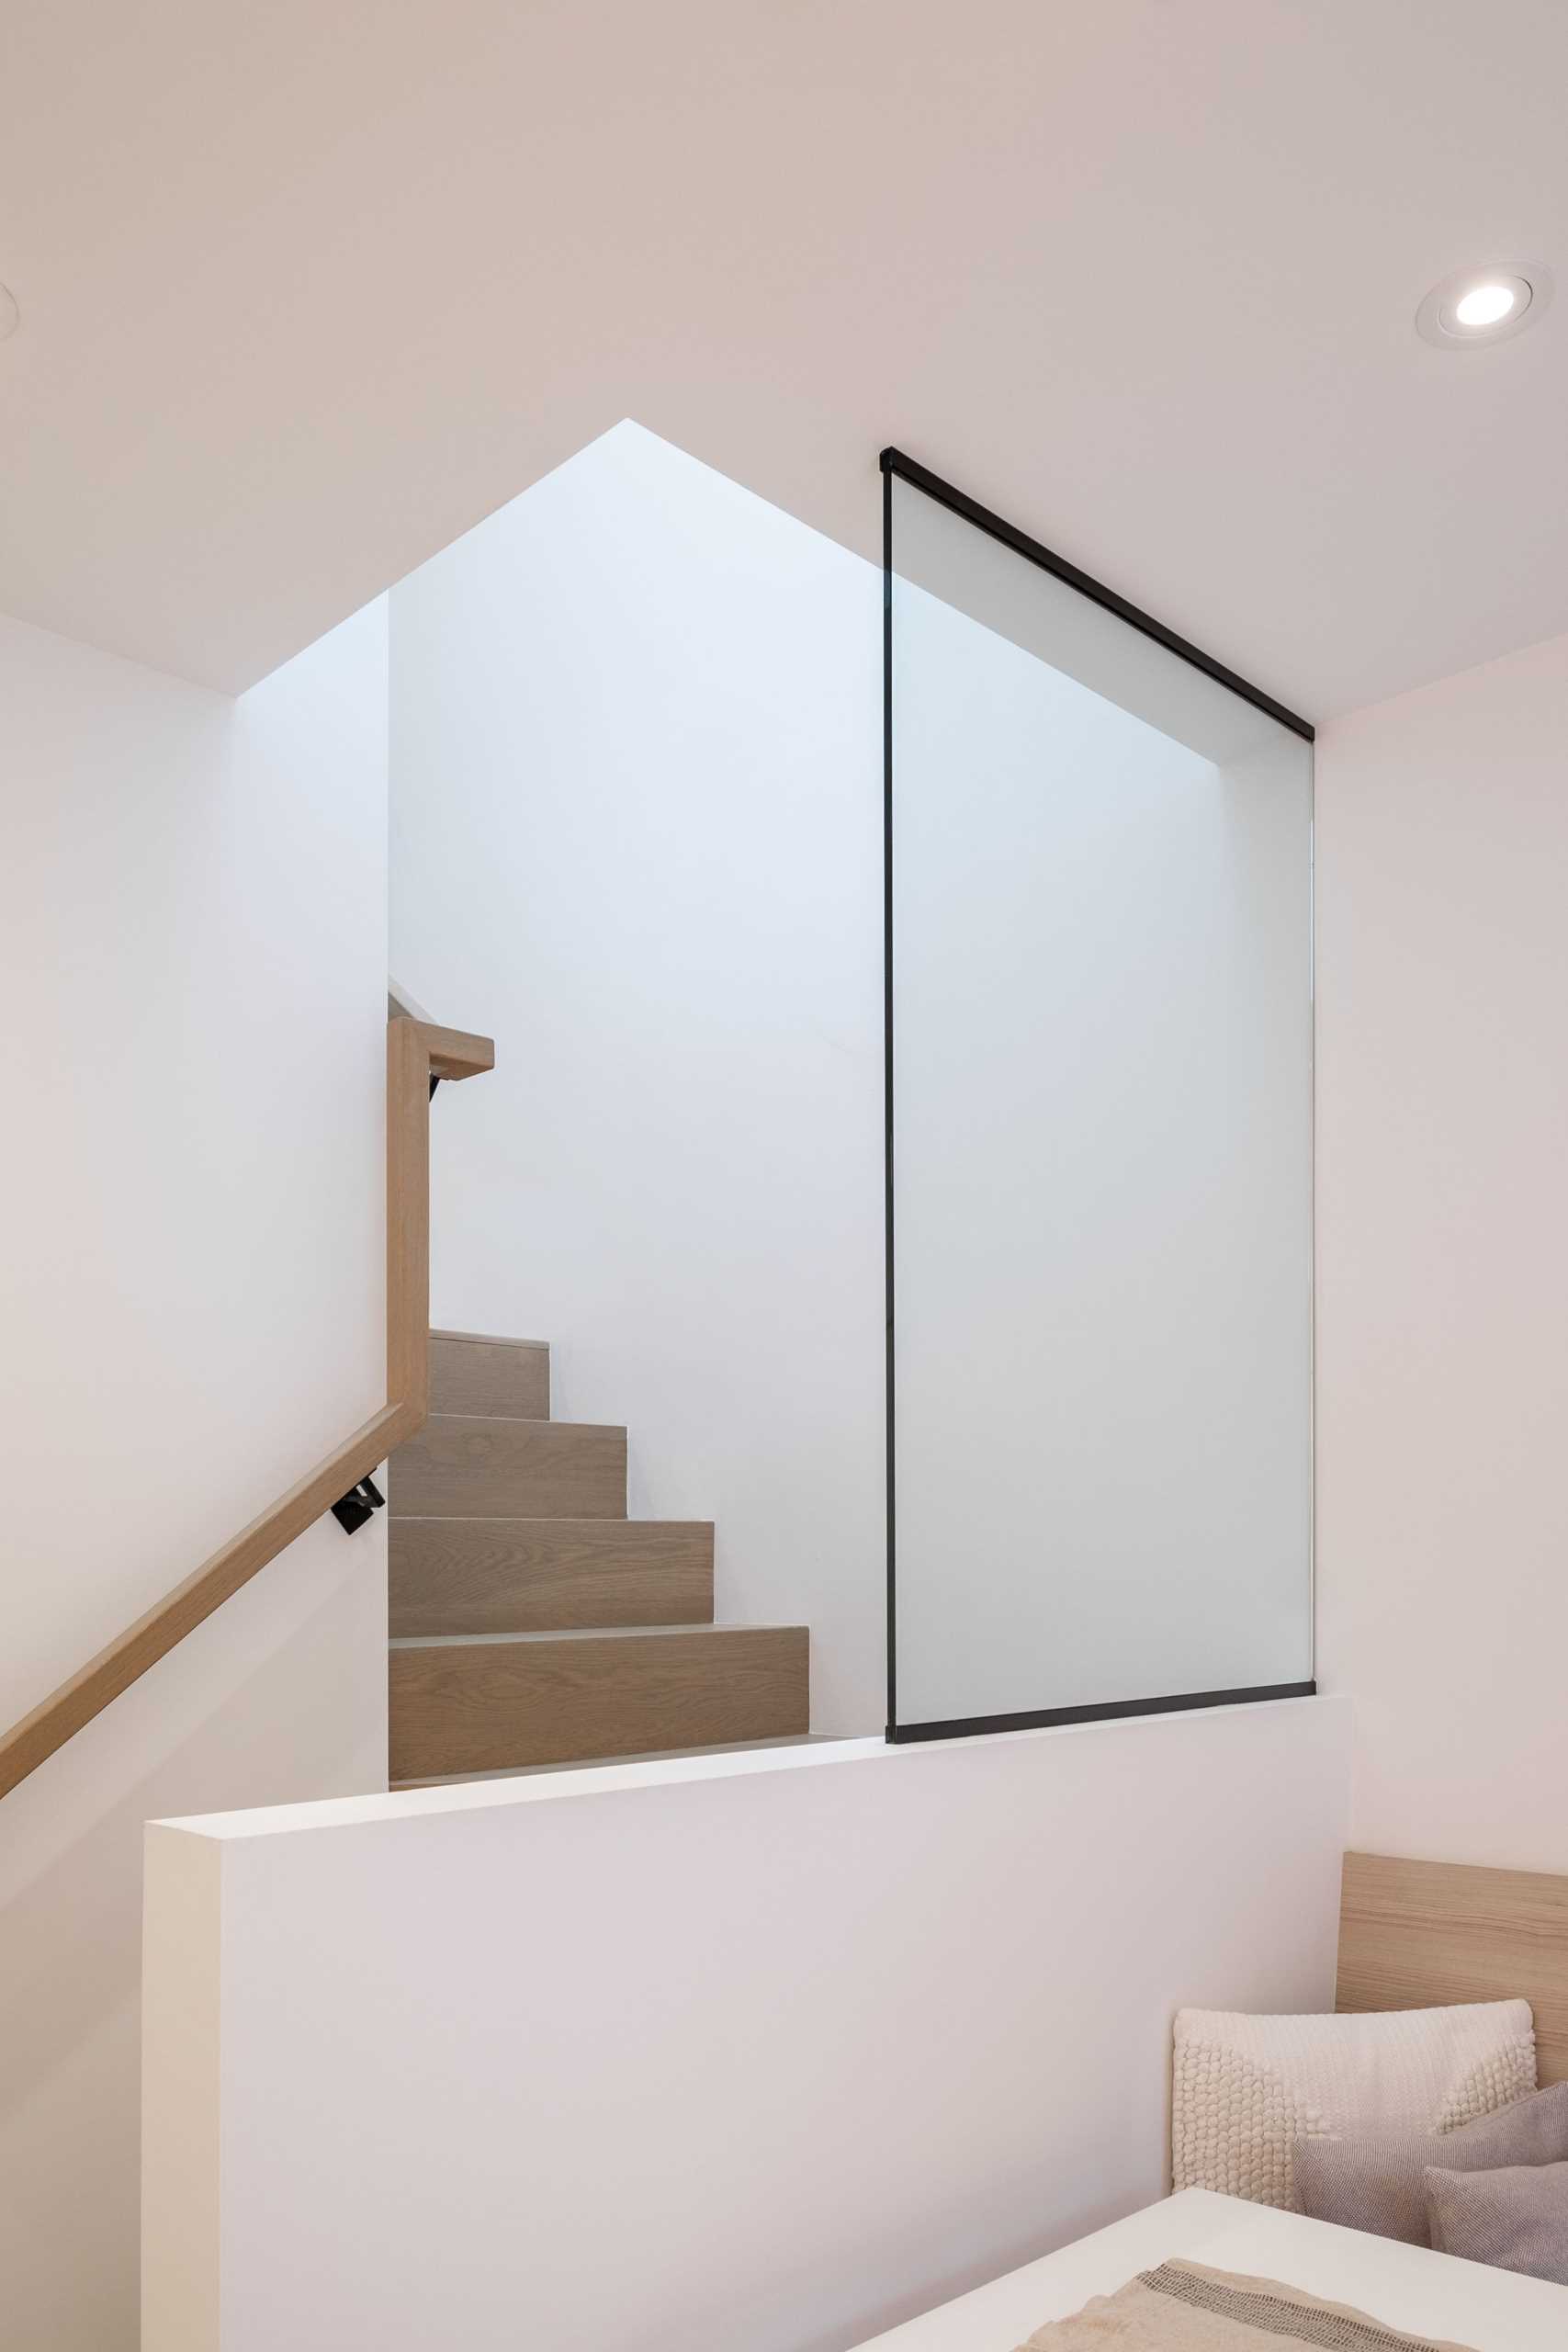 Stairs between the den and the dining area/kitchen, lead to the upper level of this laneway home, while a glass partition and railing allows natural light to travel throughout the interior.